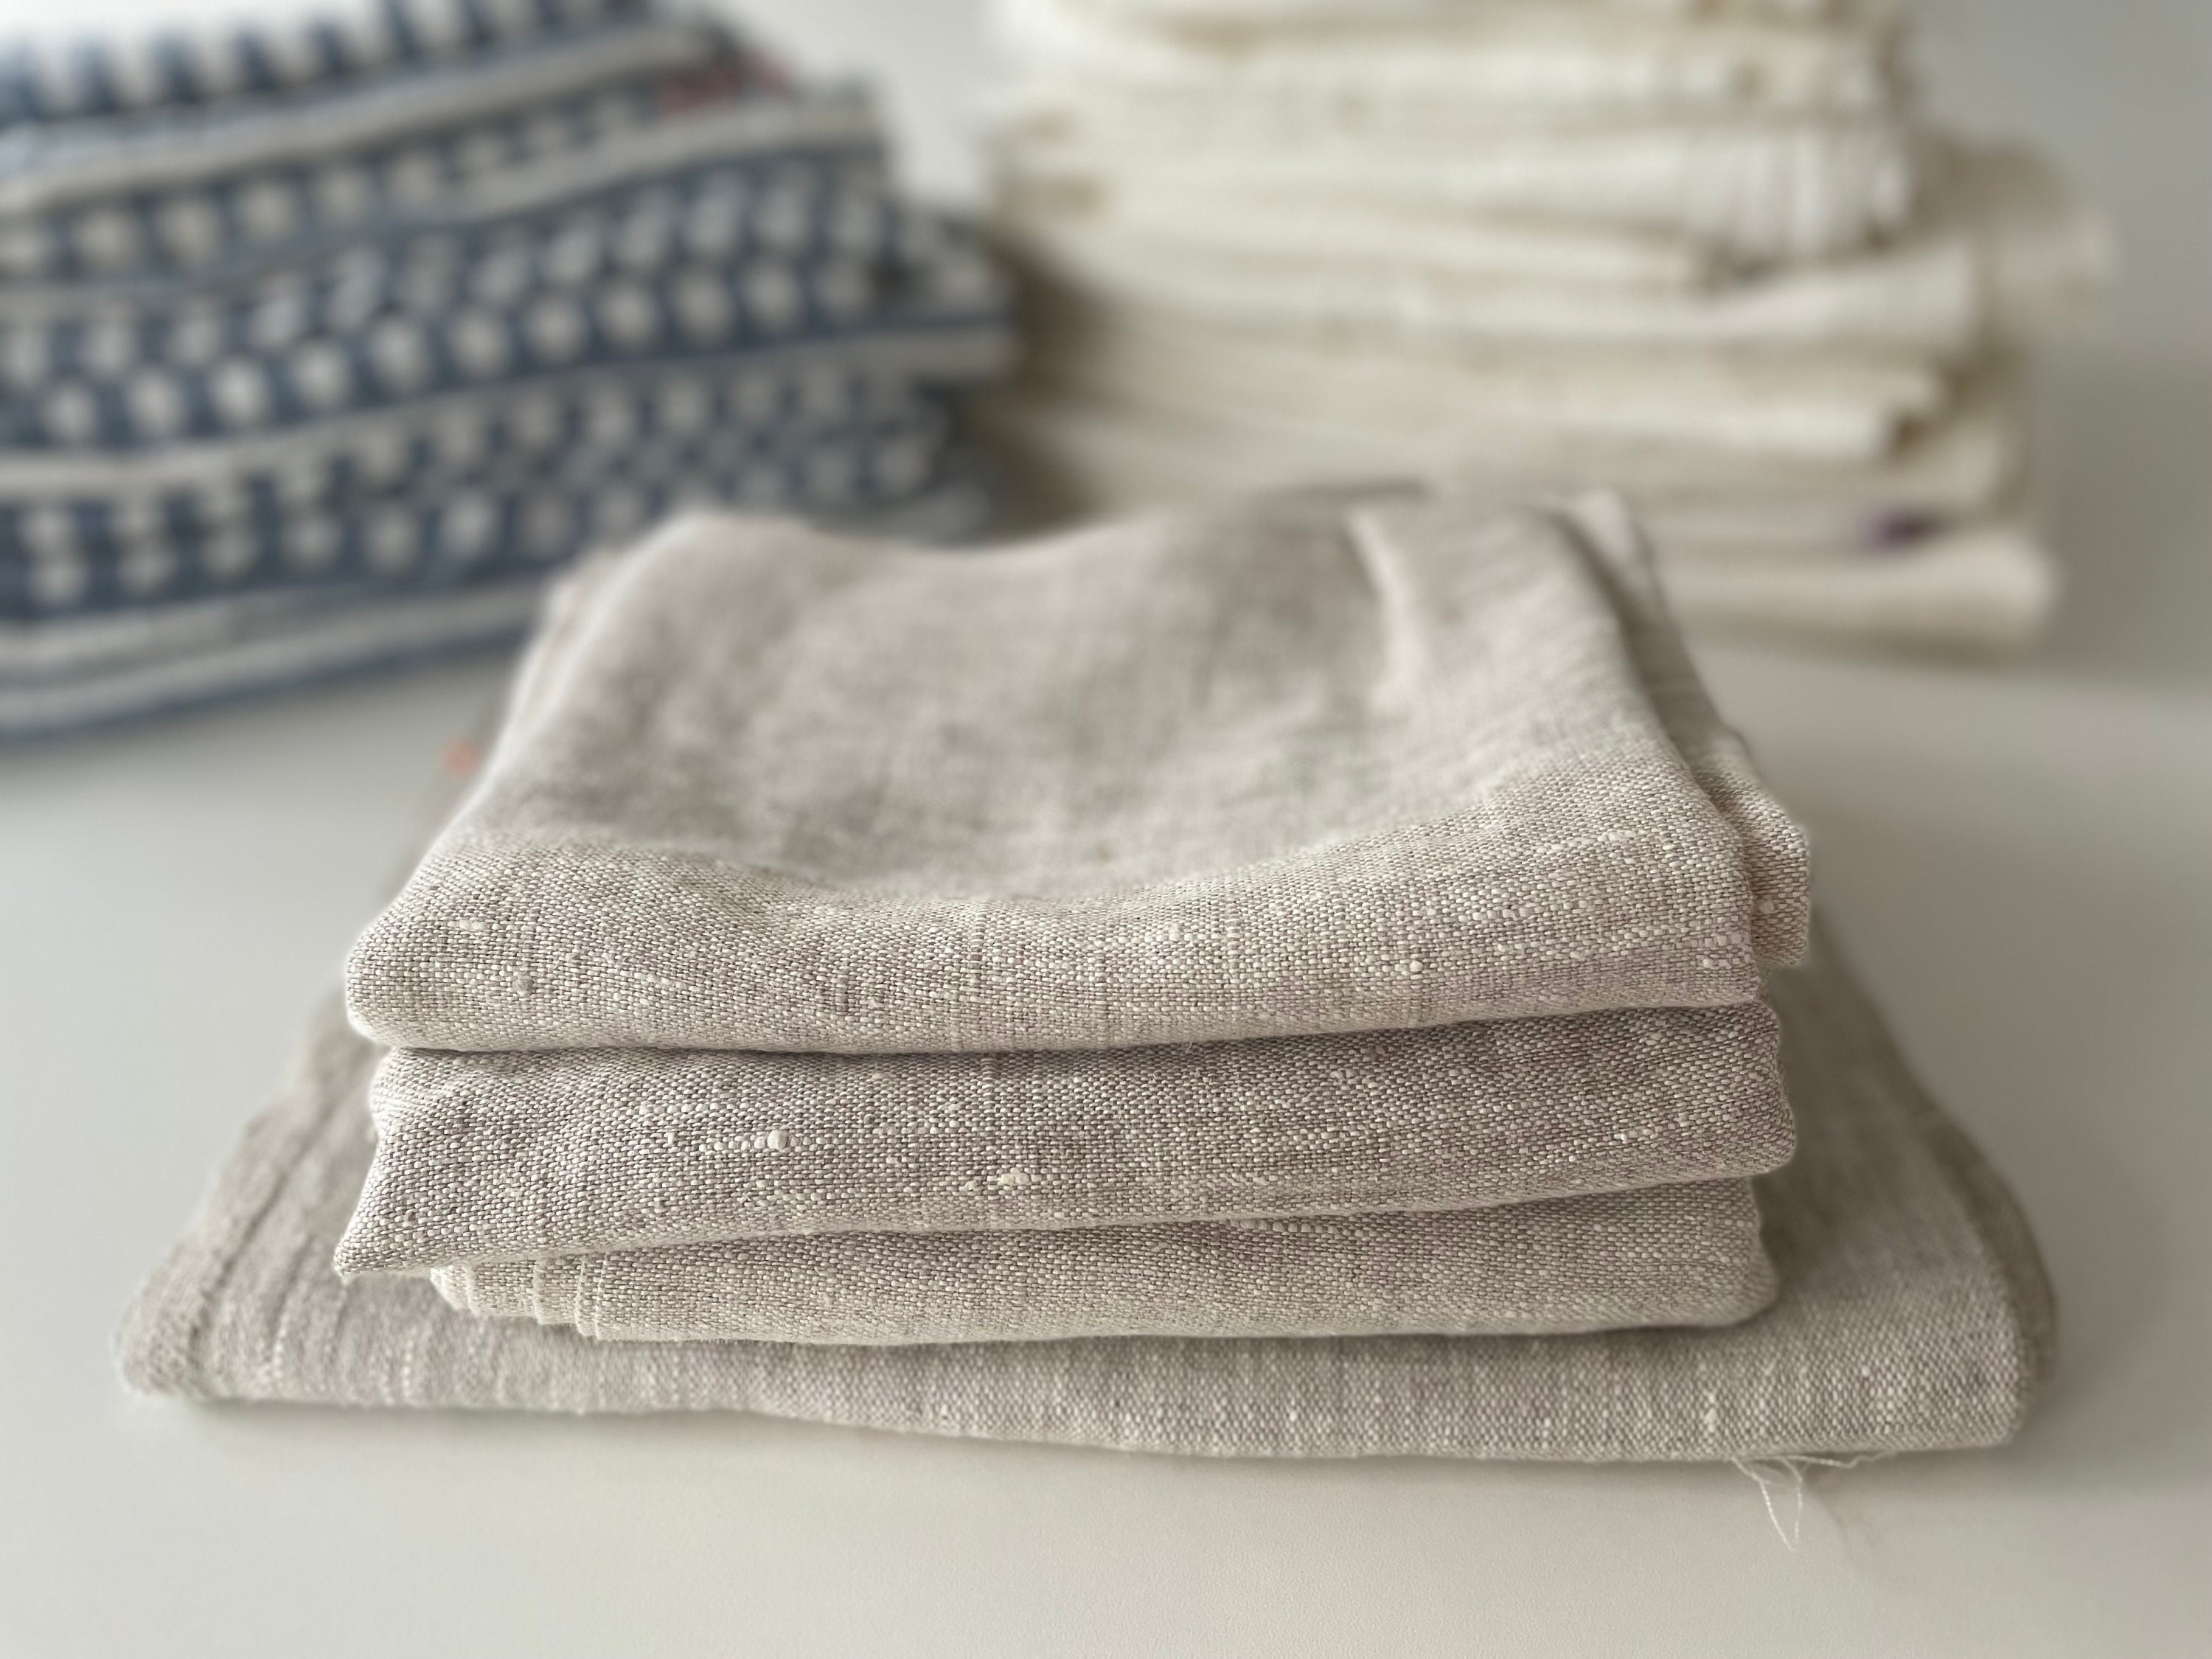 Pure 100% Linen Dish Towels - Set of 2 Linen Kitchen Towels Waffle Weave  Natural Color - 13 x 29-inch Soft Lightweight Stone-Washed Linen Hand  Towels